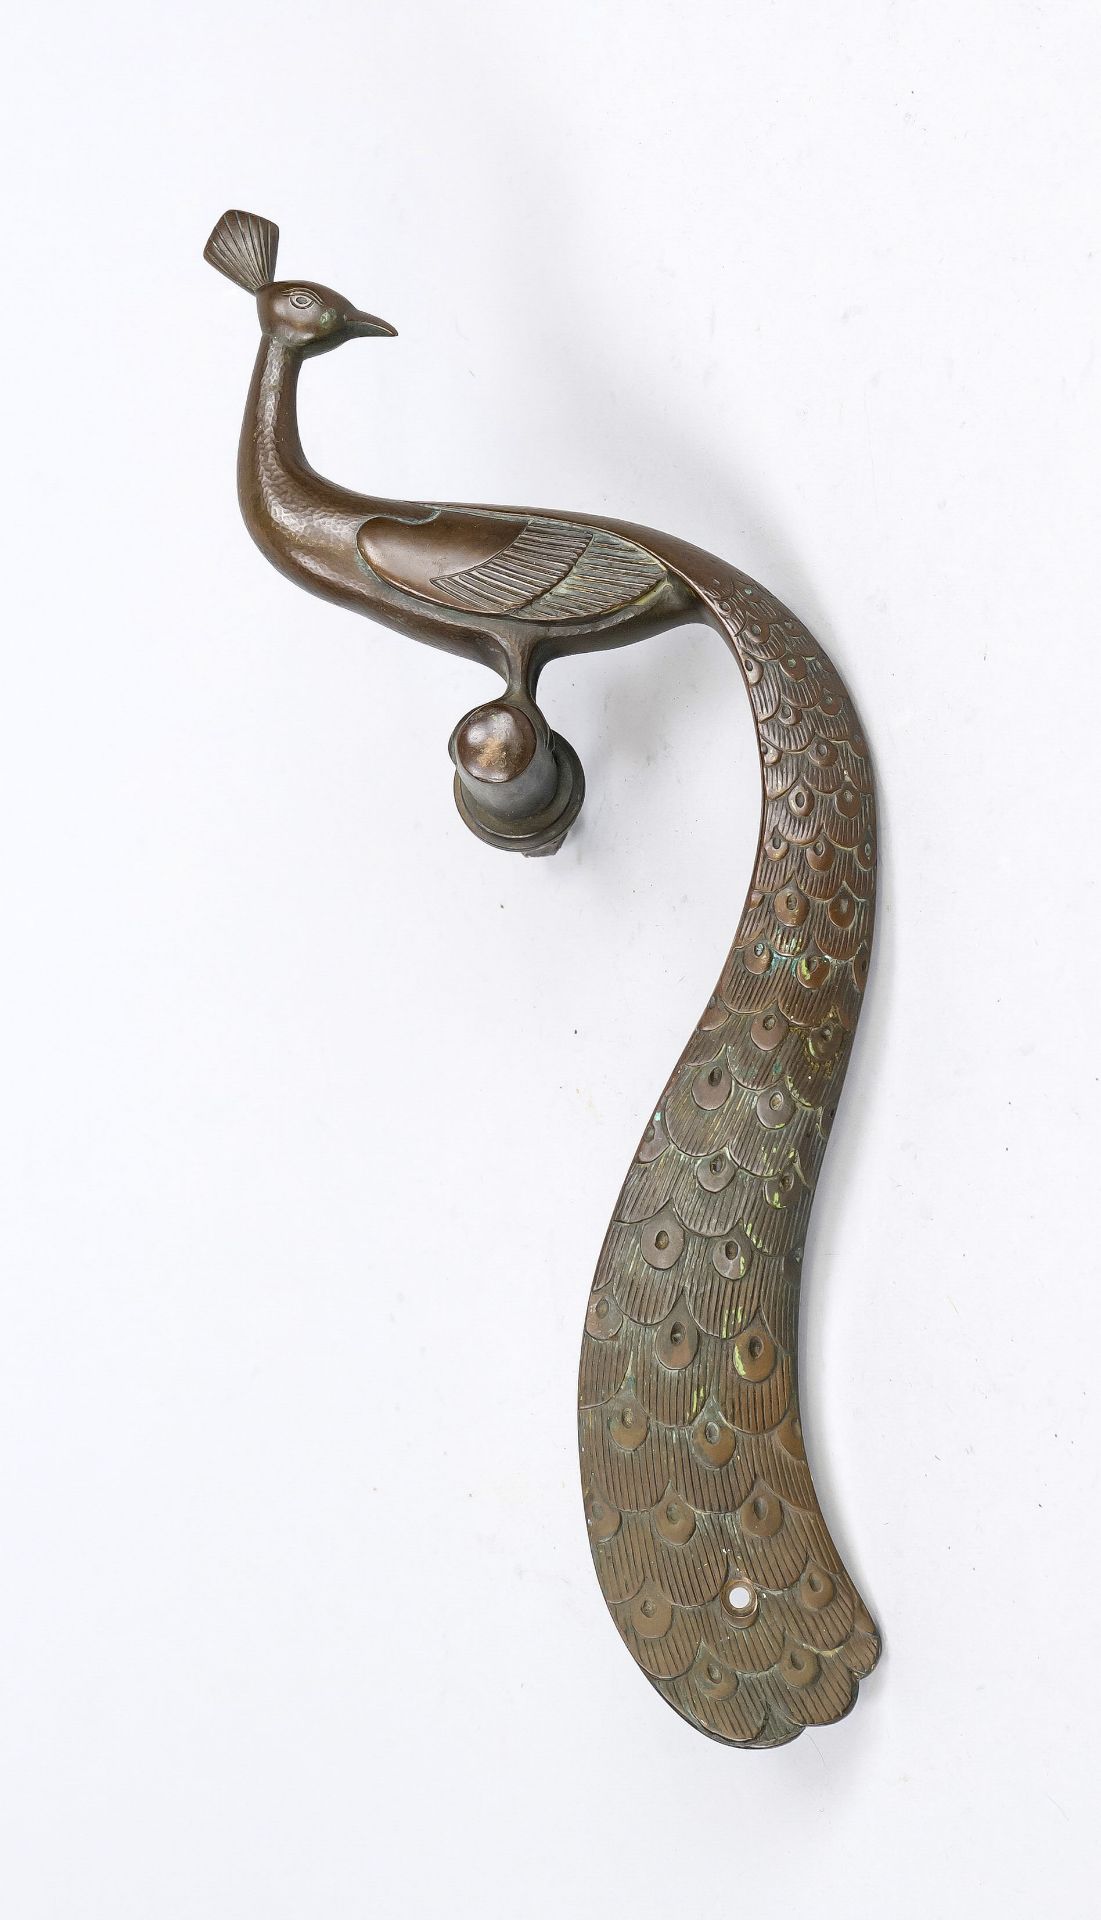 Large door handle in the shape of a peacock, Germany (perhaps Worpswede/Vogeler?), bronze with